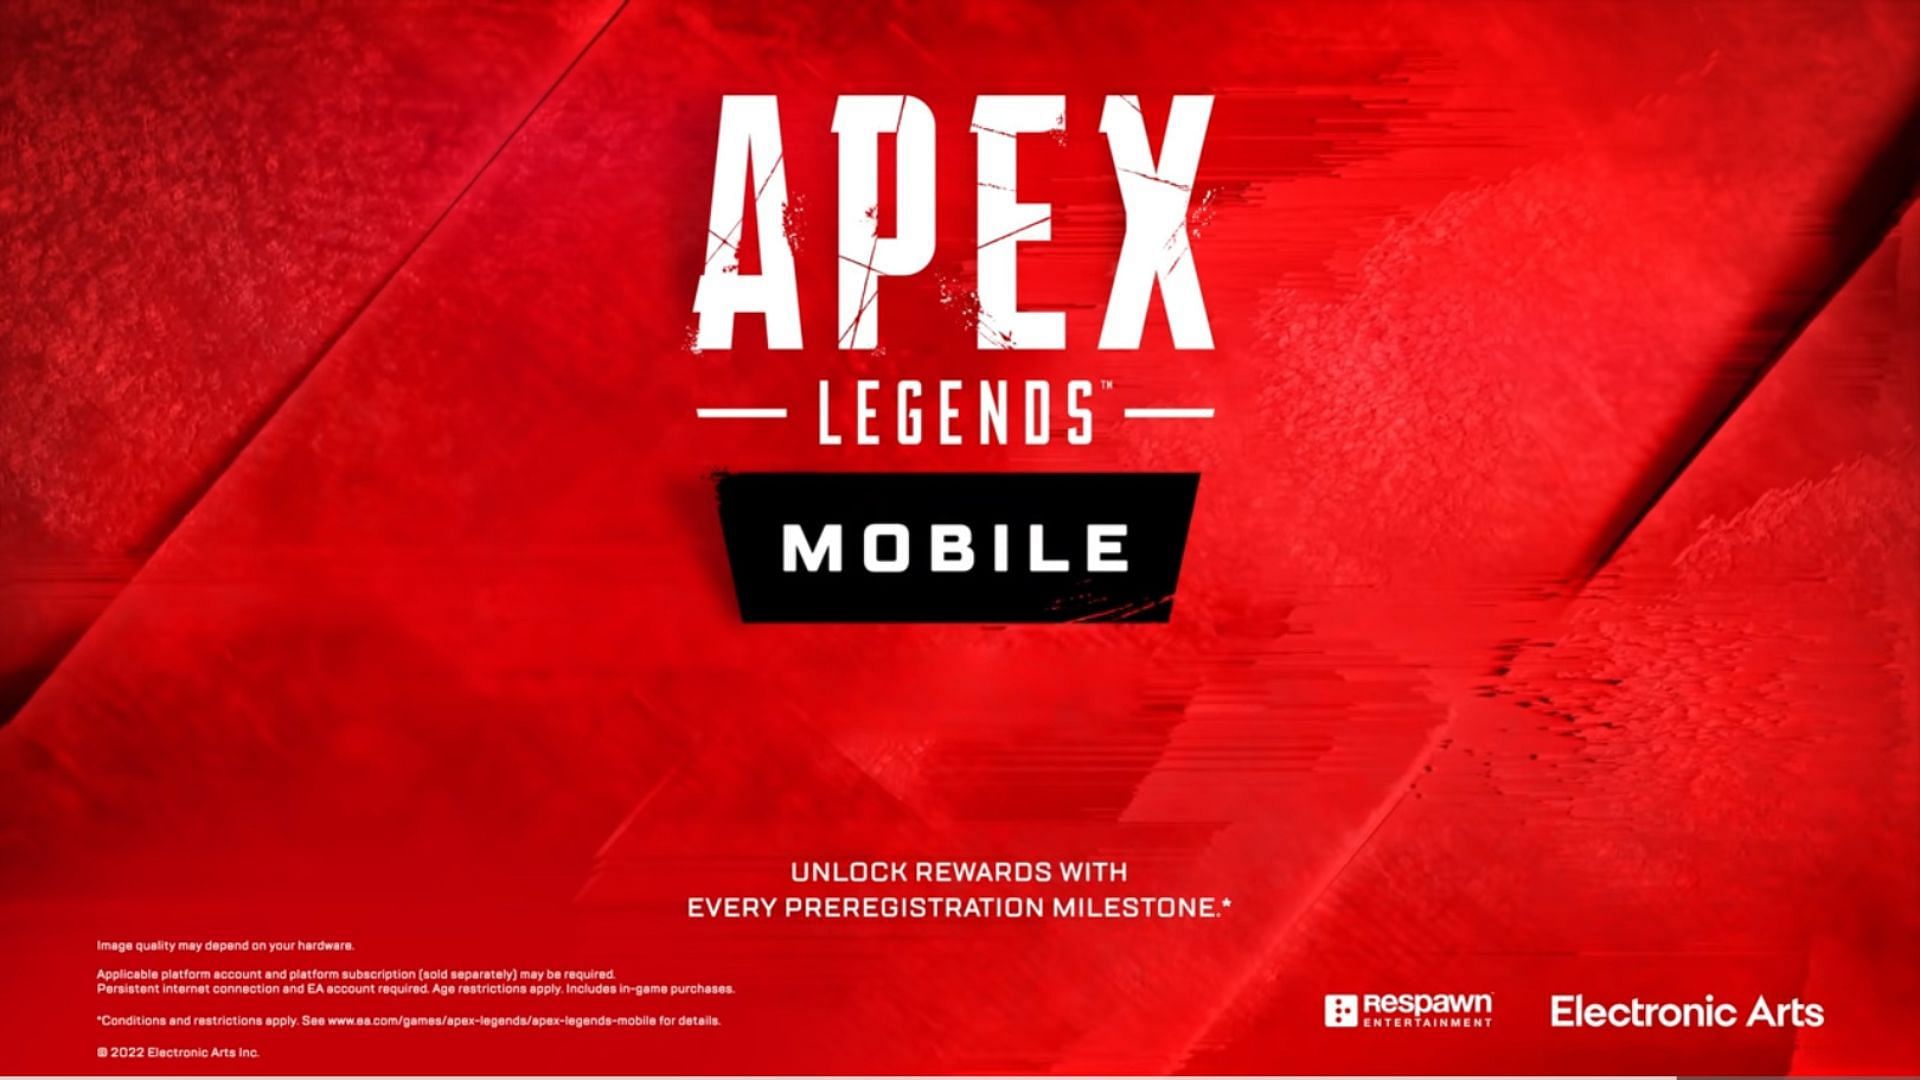 Why did Apex Legends Mobile get shut down? Real reason explored